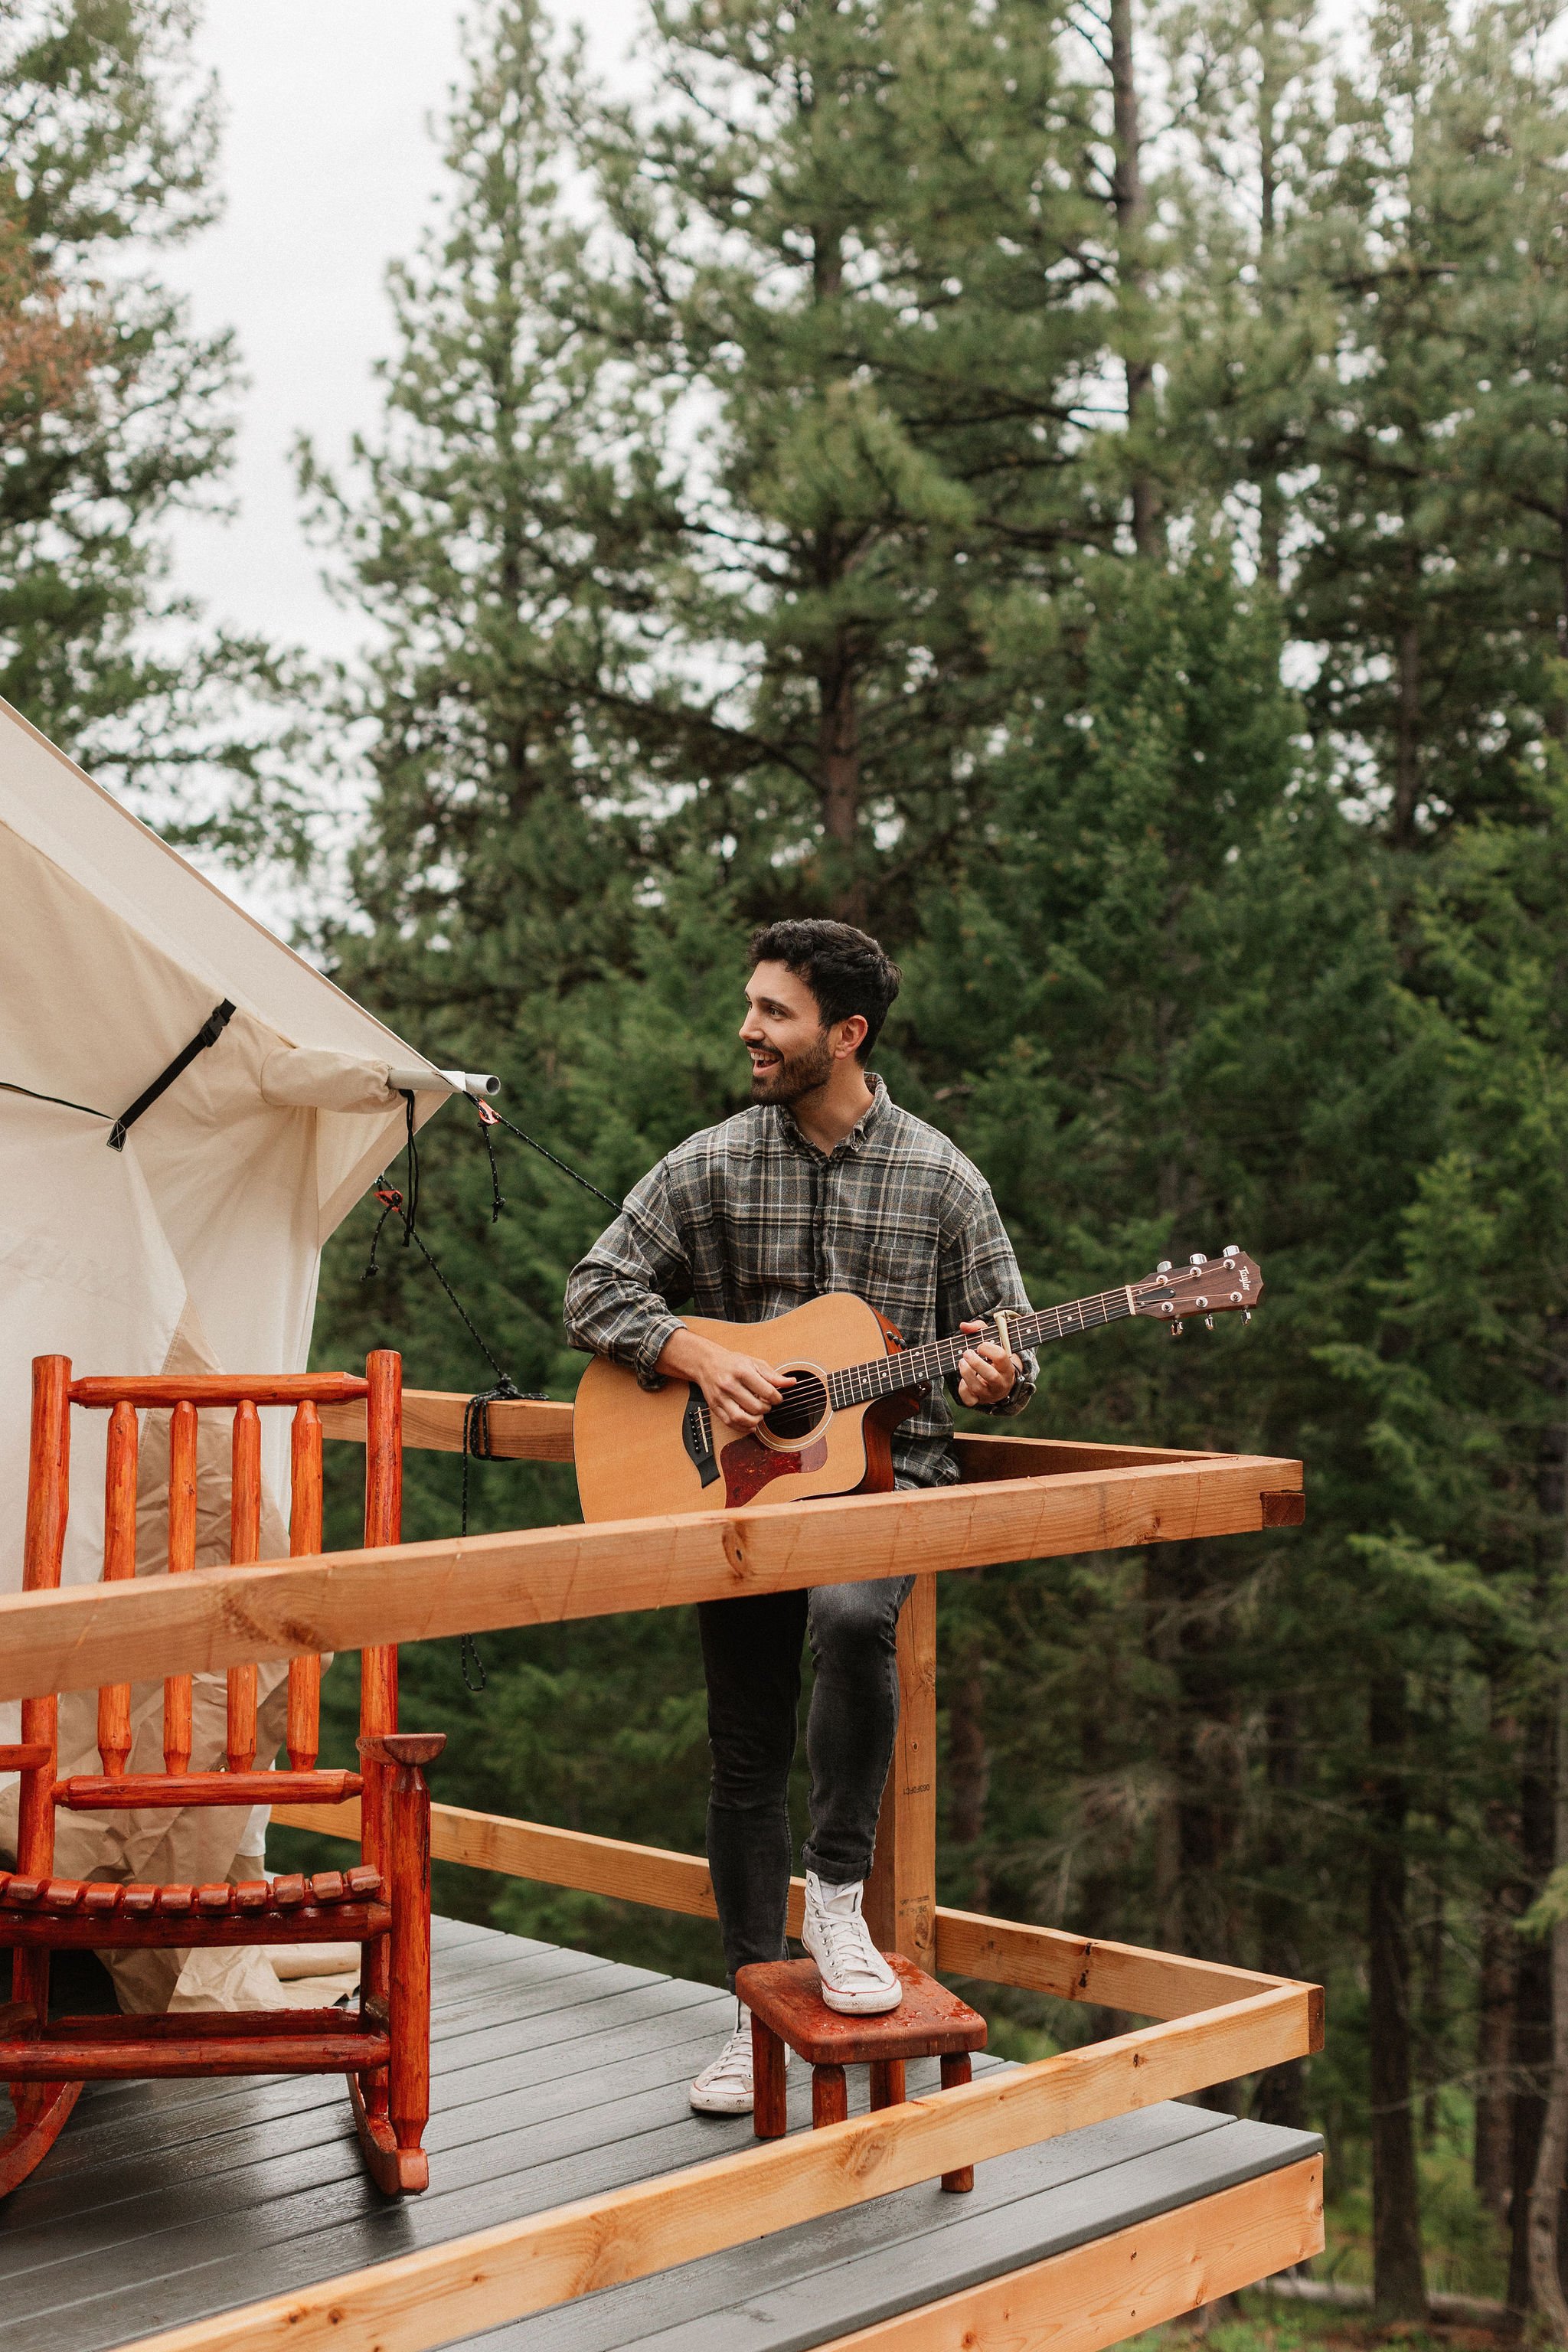 Are you an artist/musician/maker? Check out our Artist Fellowship Program at The Hohnstead Glamping Cabins Resort near Missoula, Montana